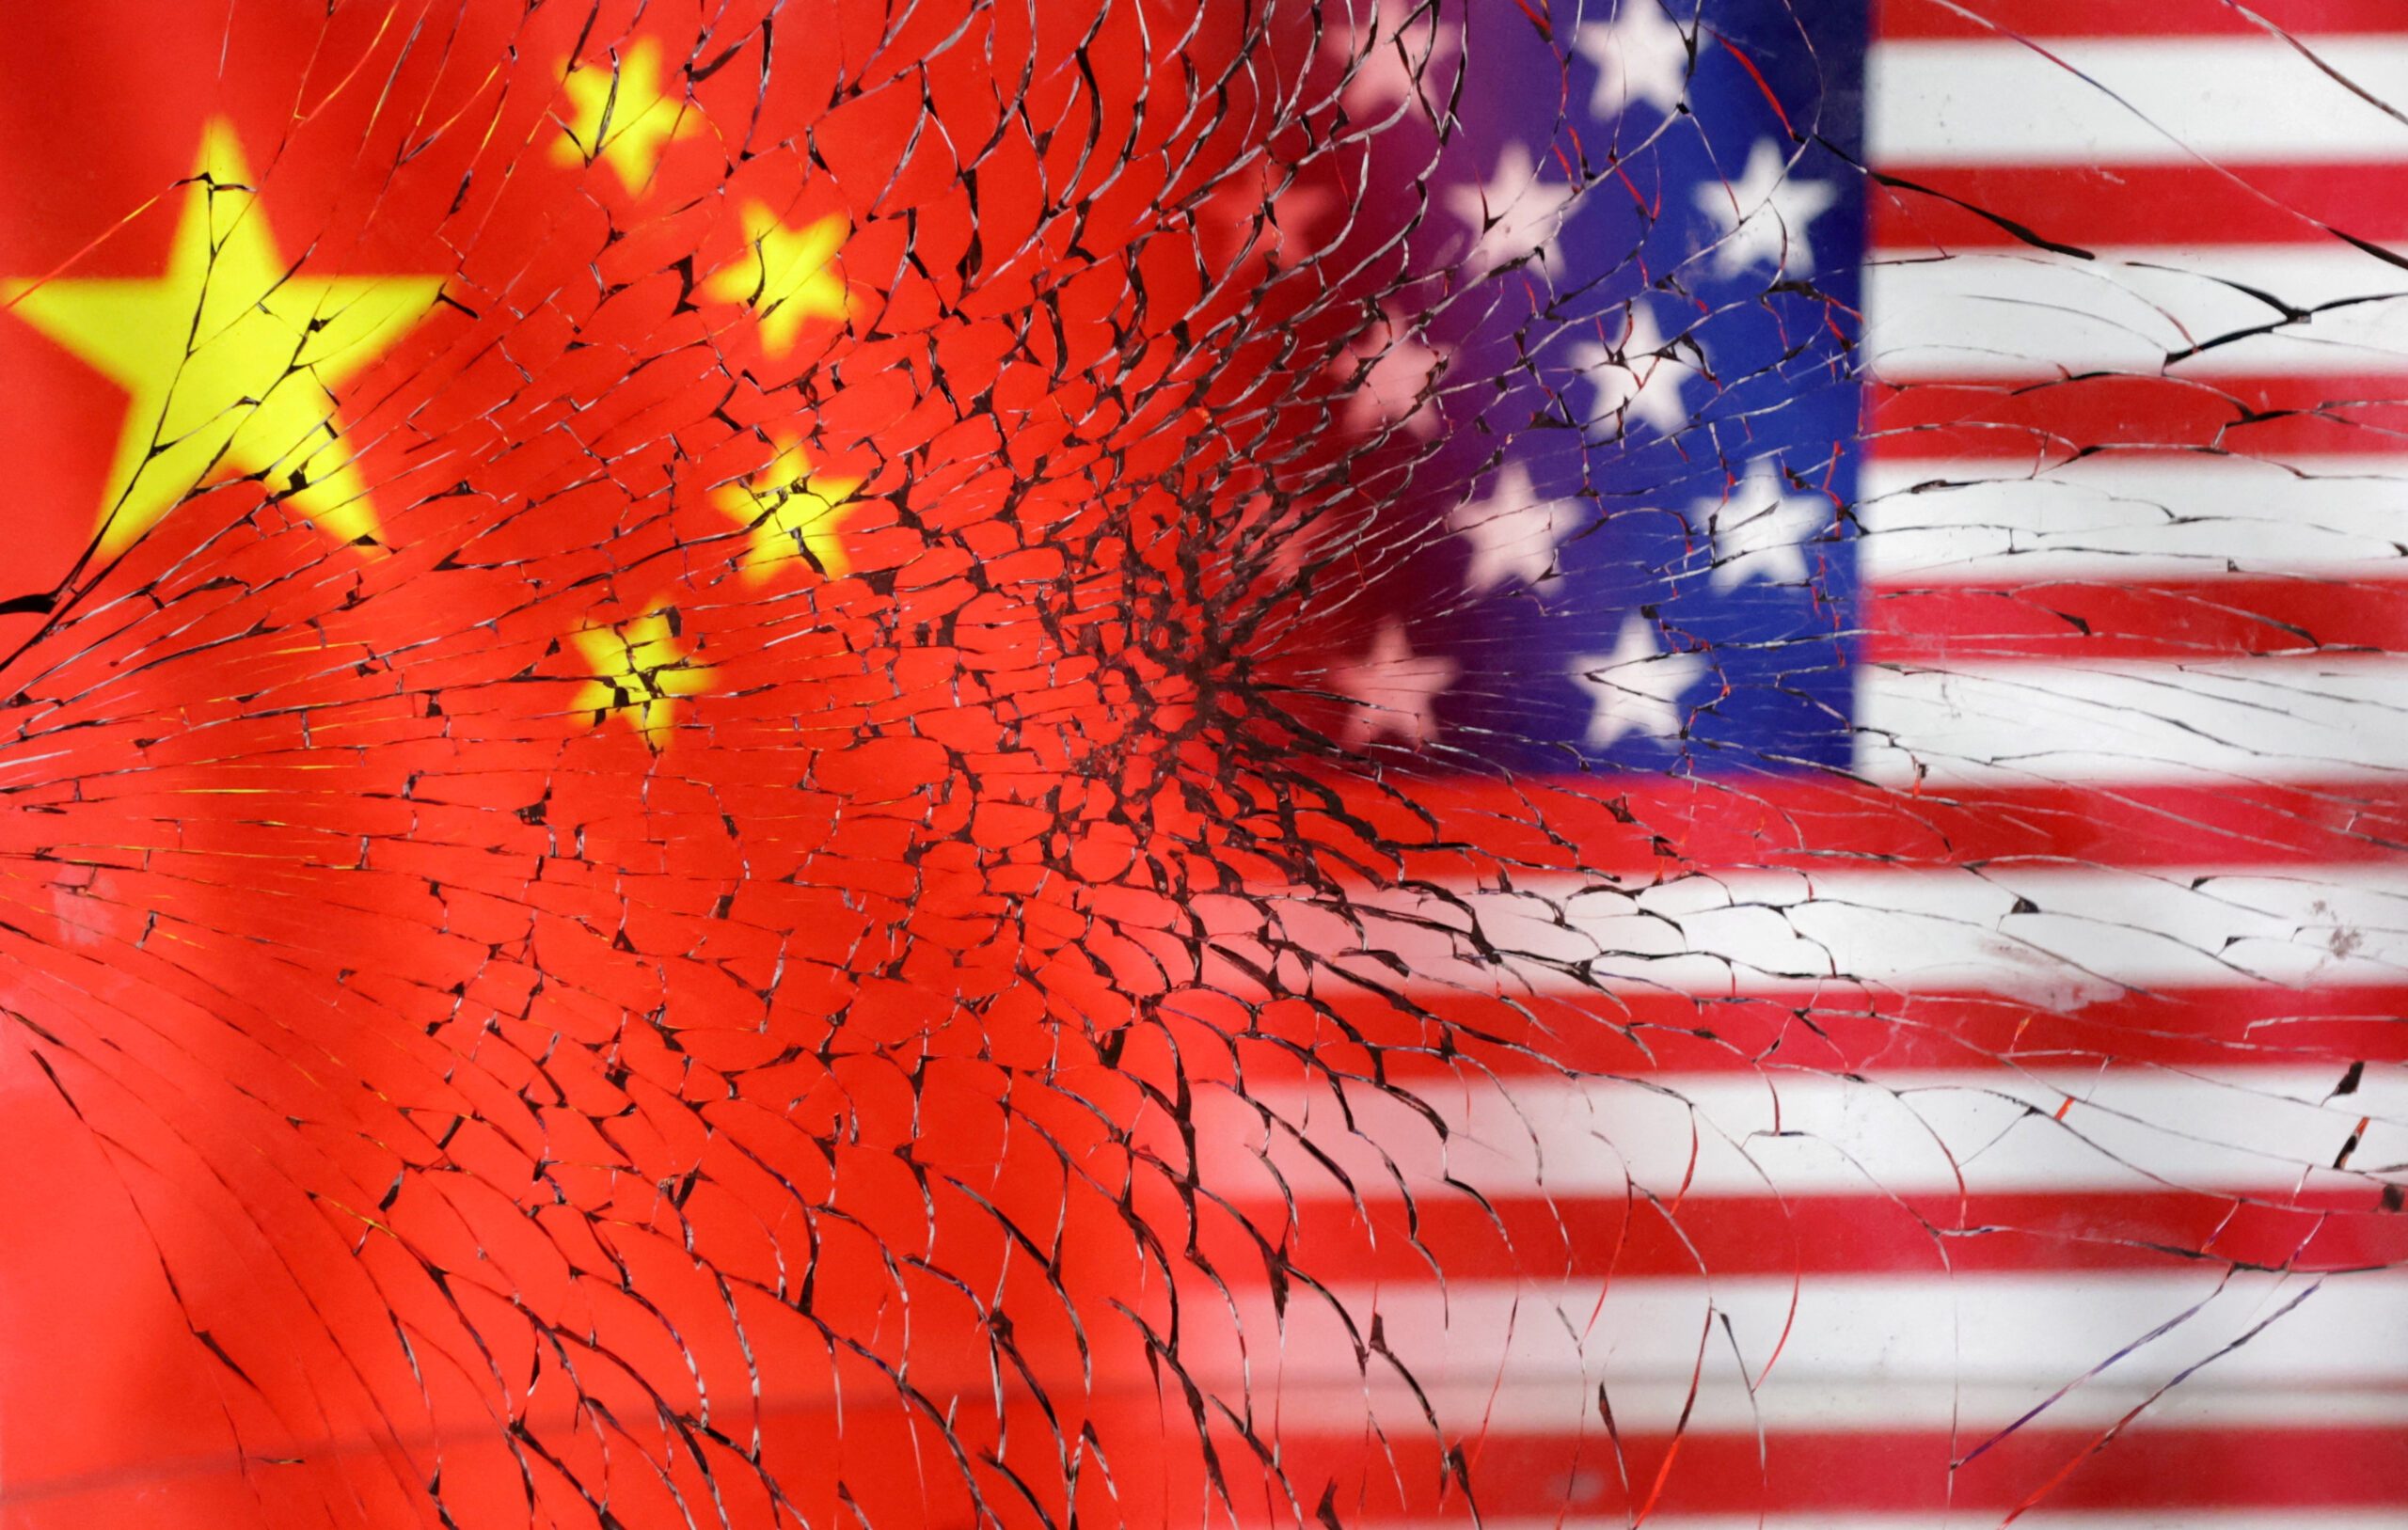 The LP View: HK fund managers, startups in catch-22 situation amid intensifying China-US tensions